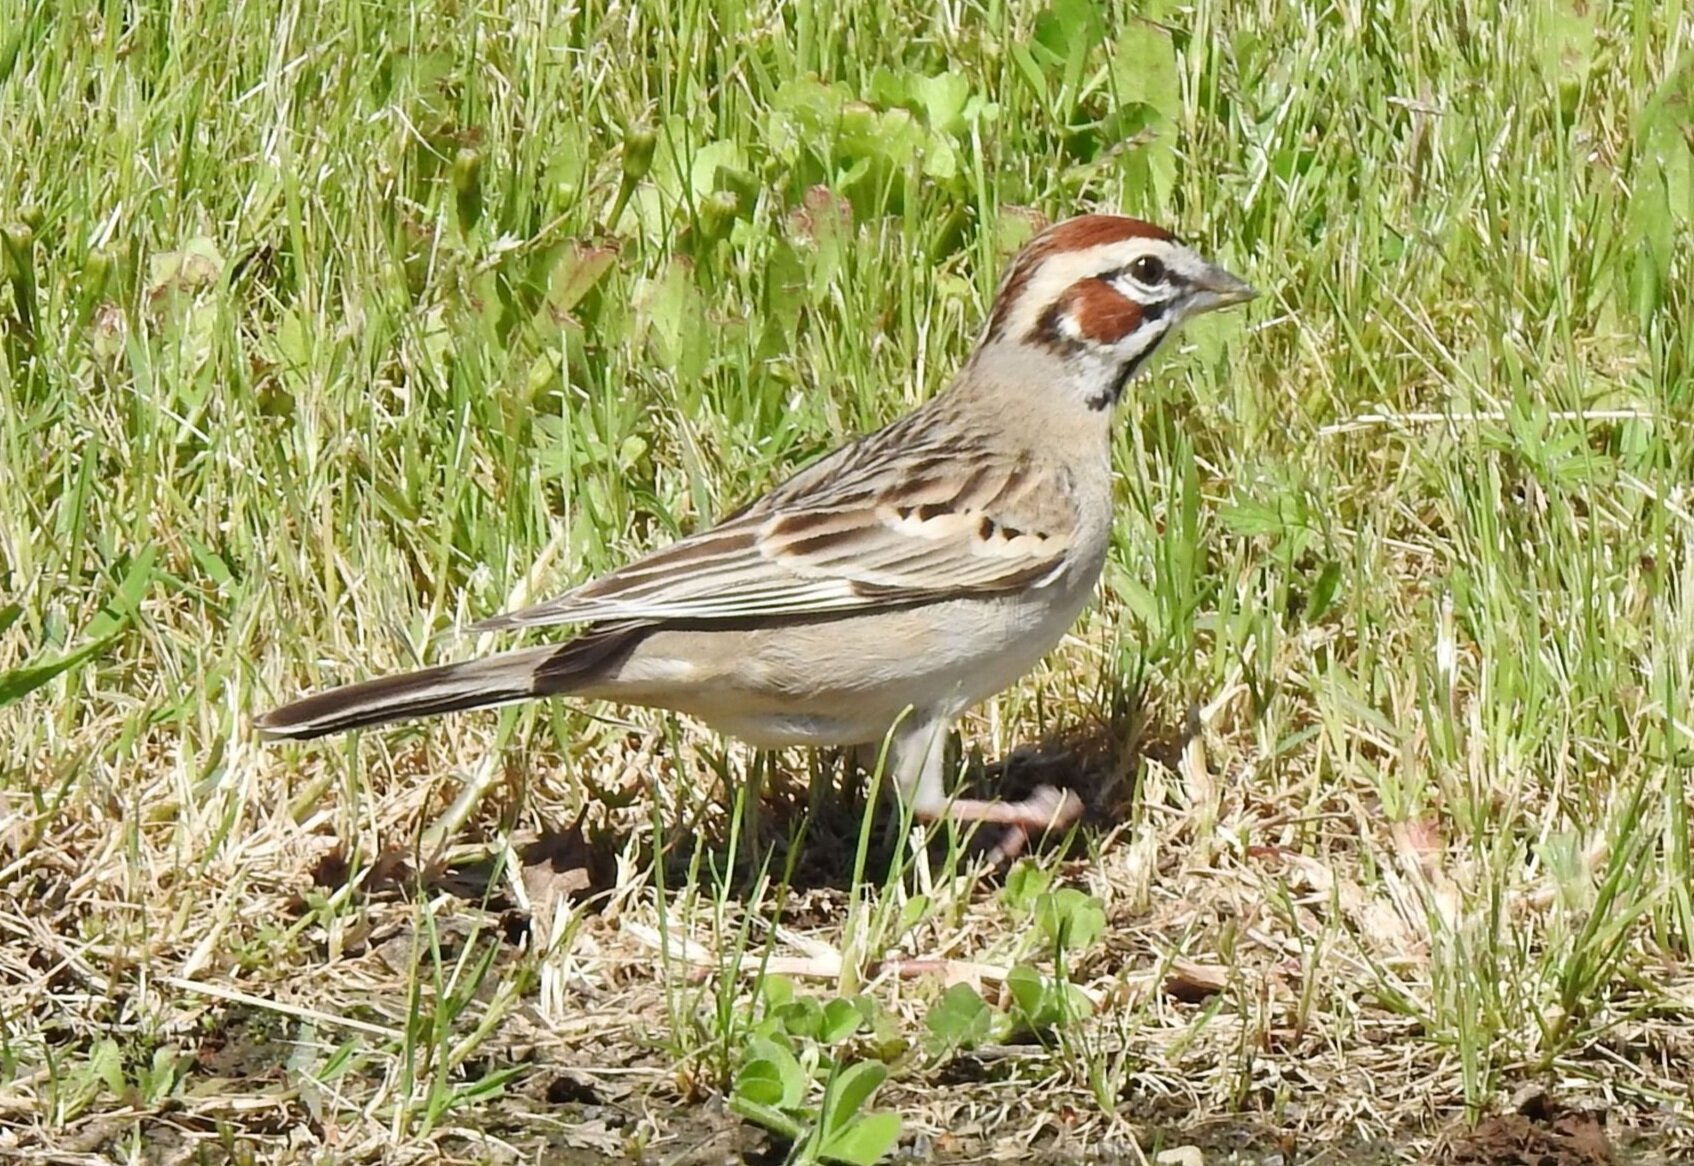  Lark Sparrow  Image by Mary Forrestal  